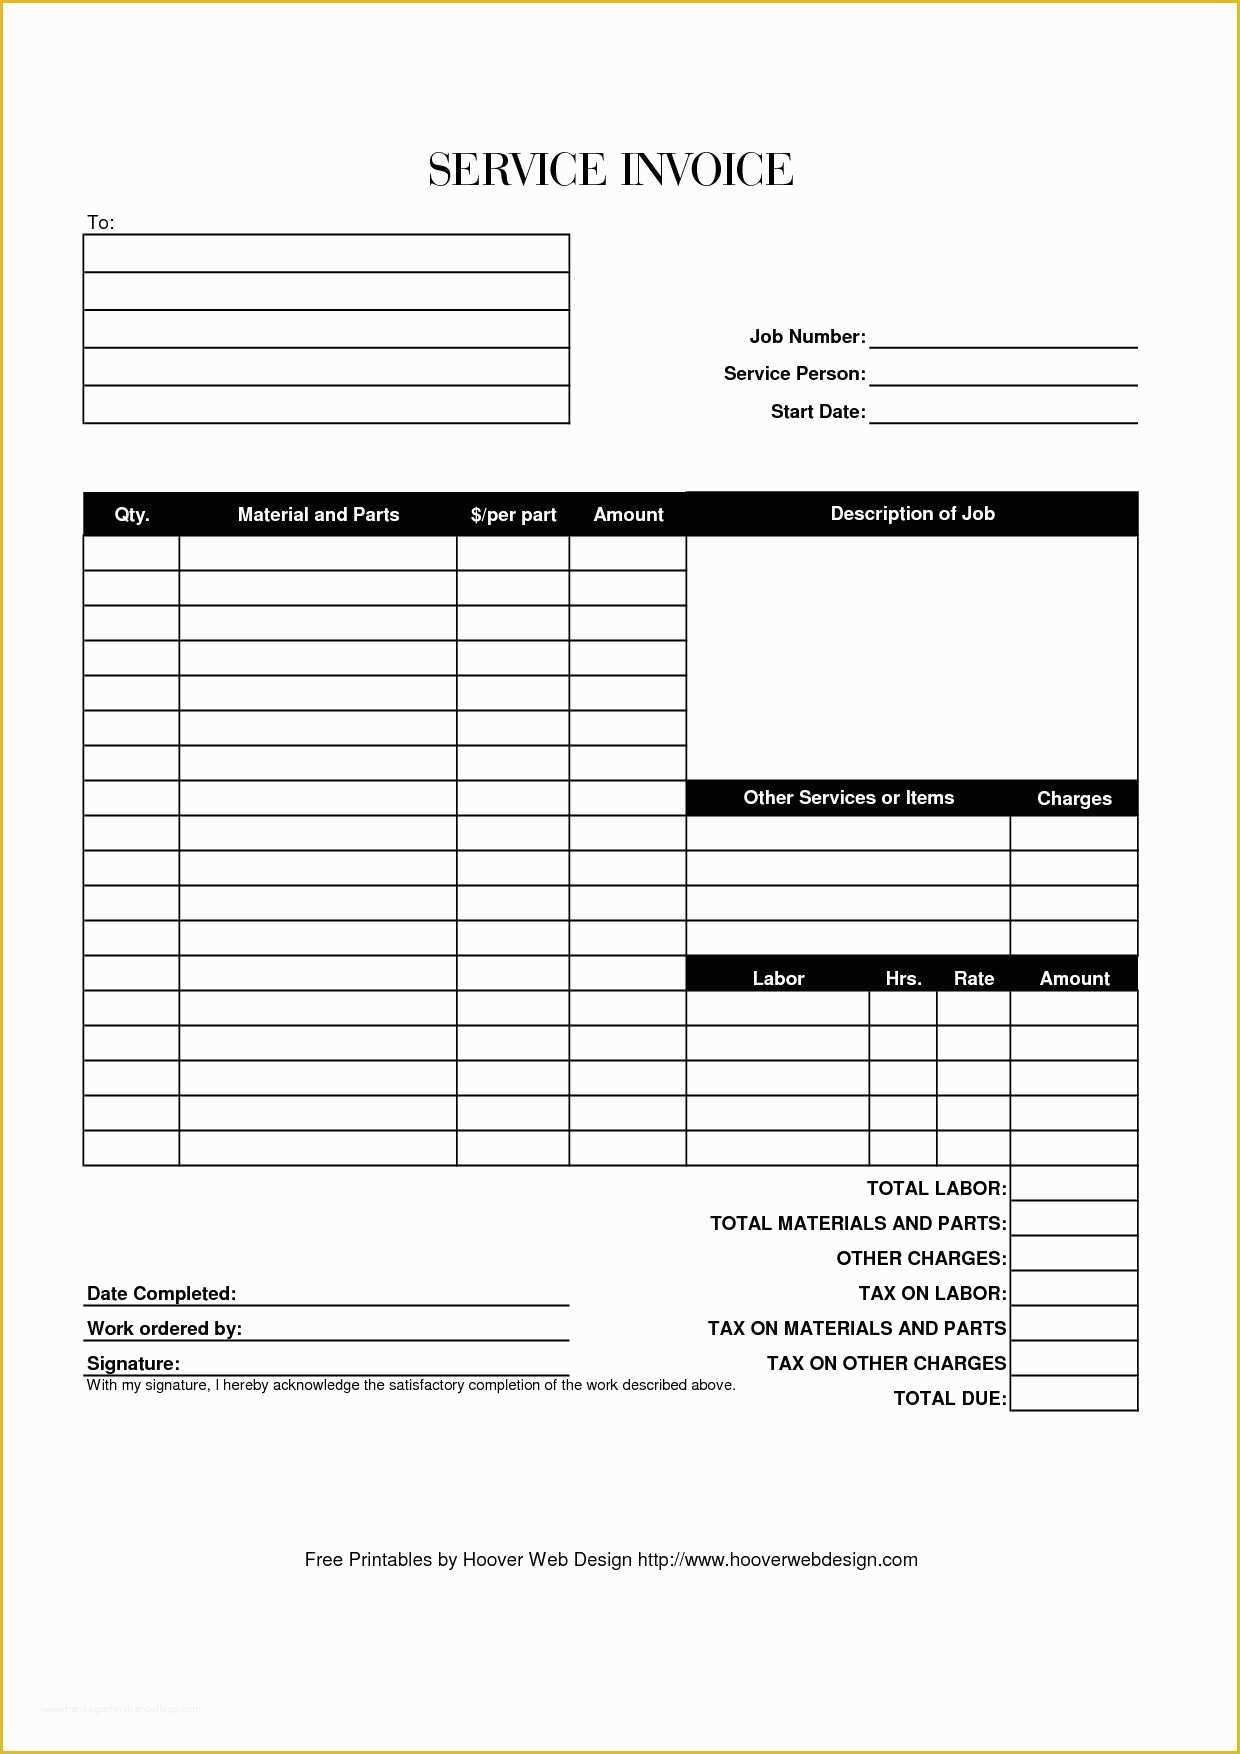 Free Blank Invoice Template Of Blank Service Invoice Blank Invoice Blank Service Invoice